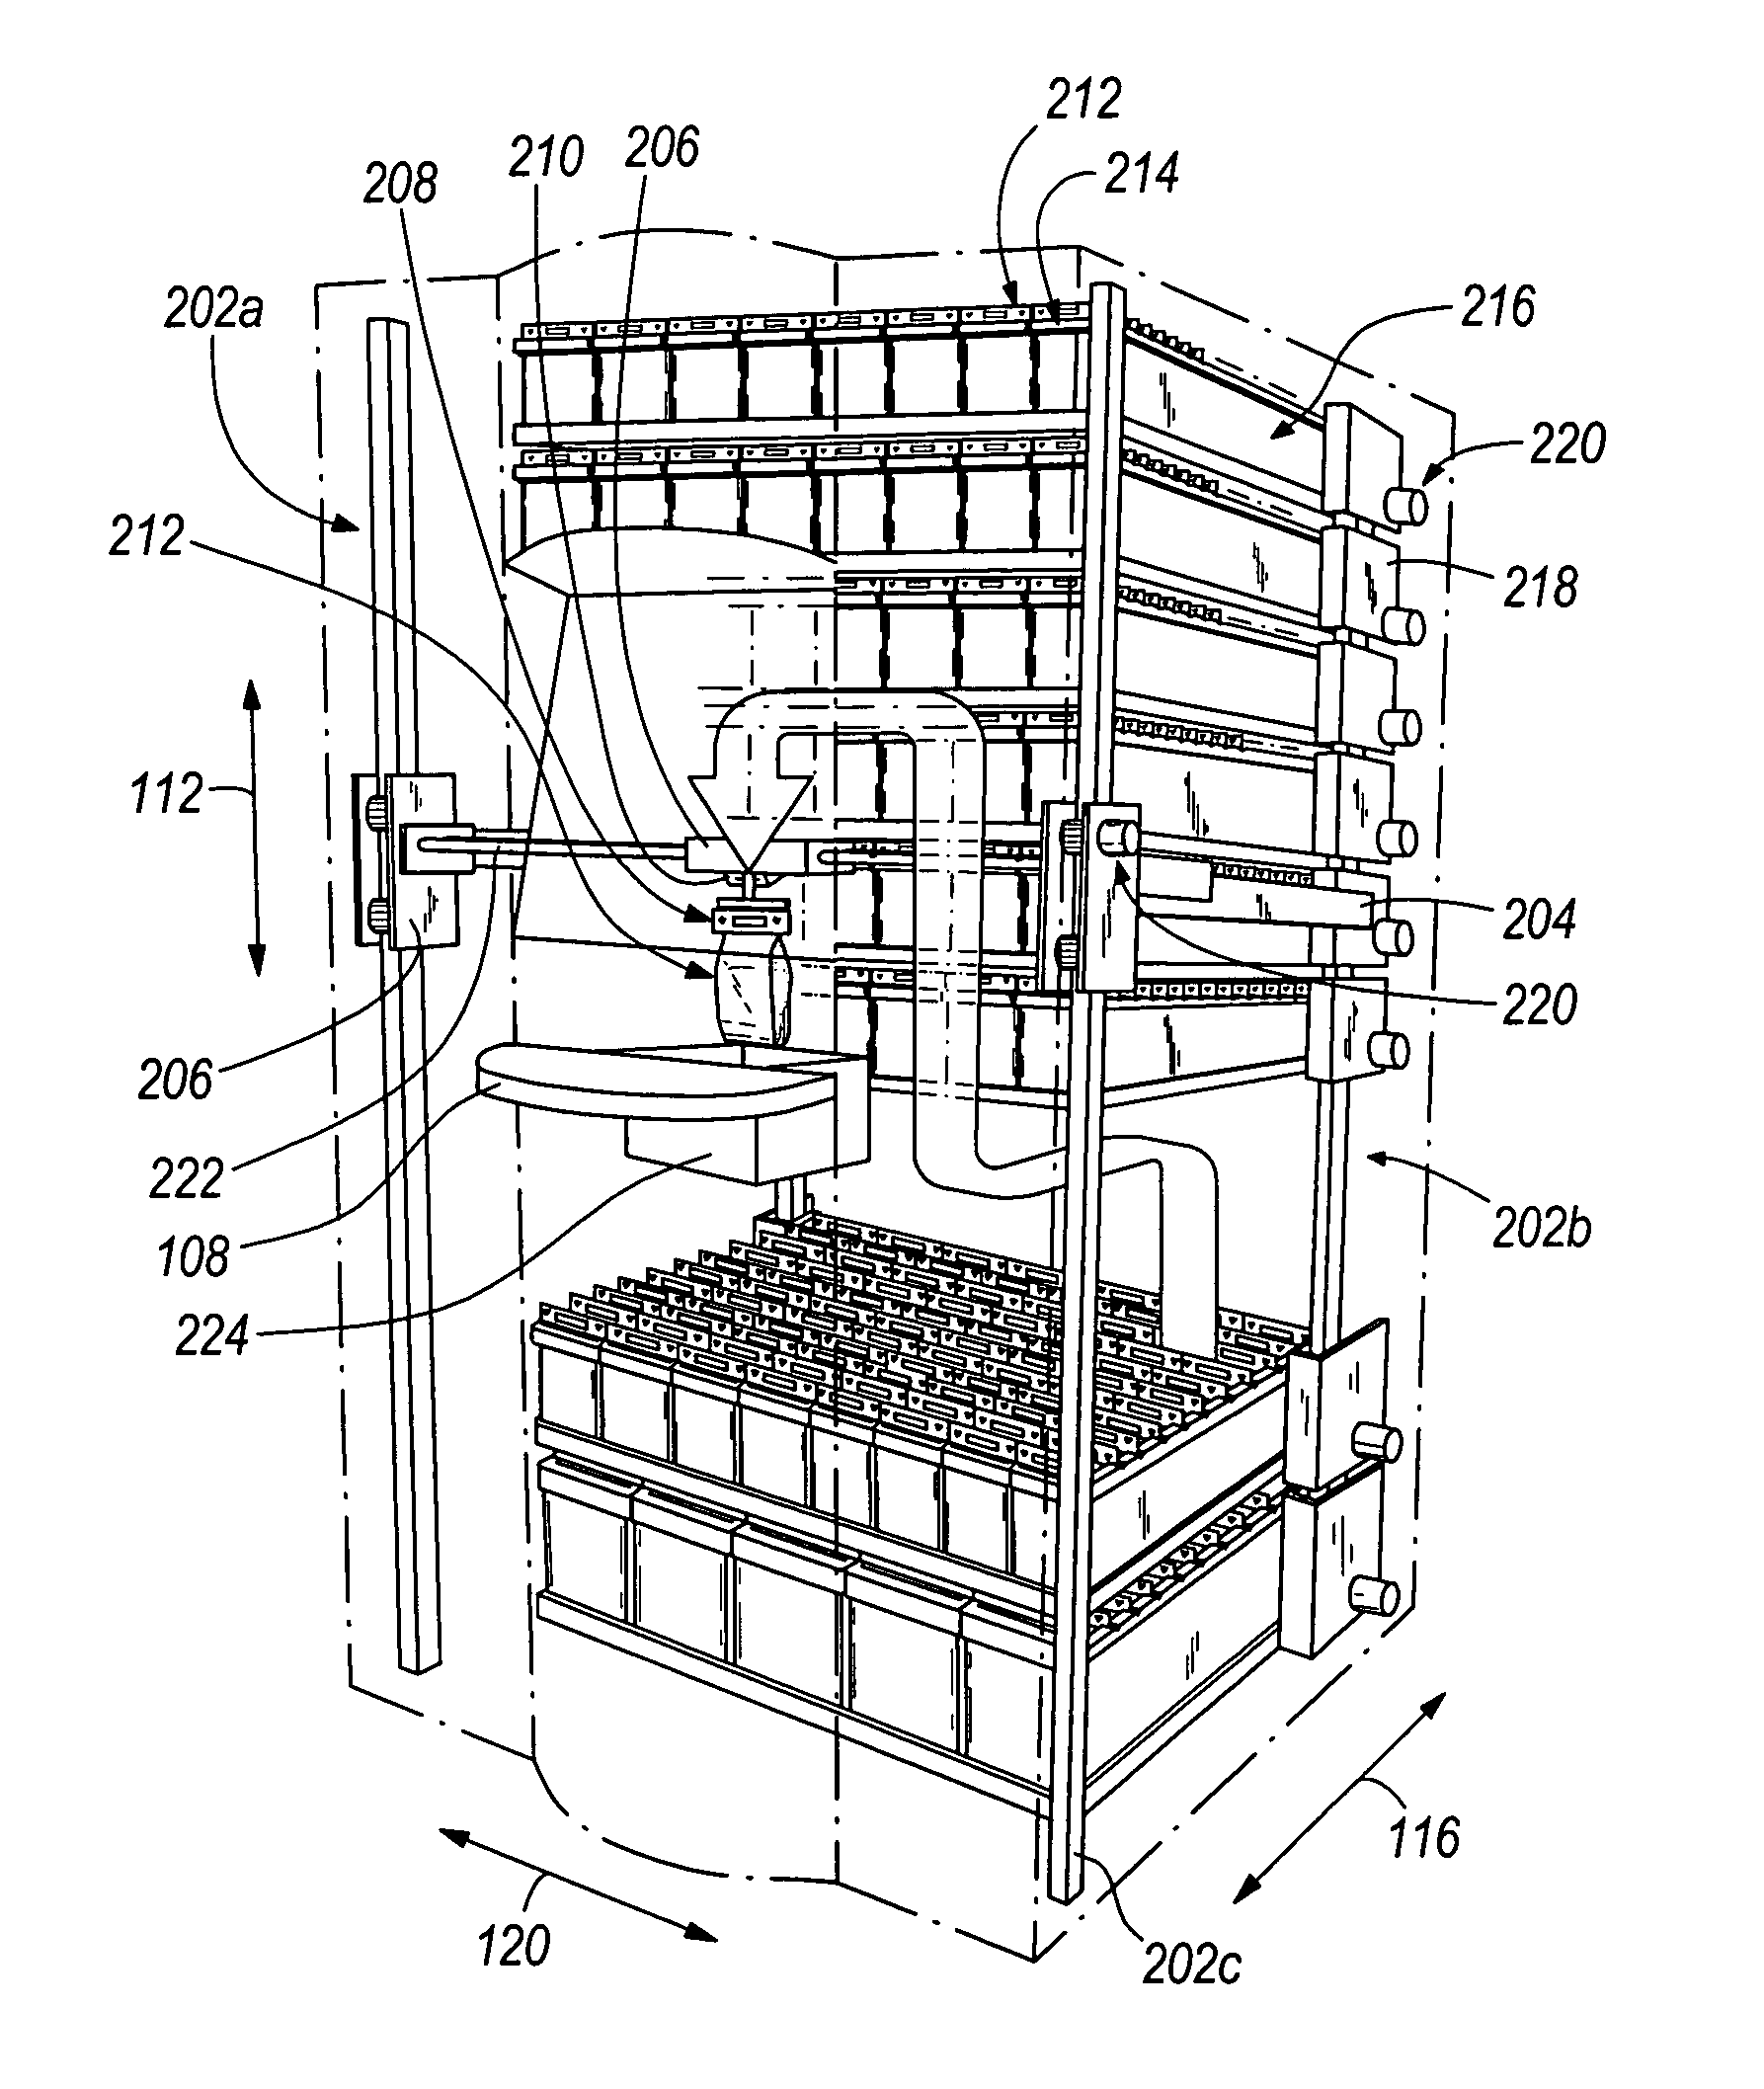 System and method for providing a random access and random load dispensing unit